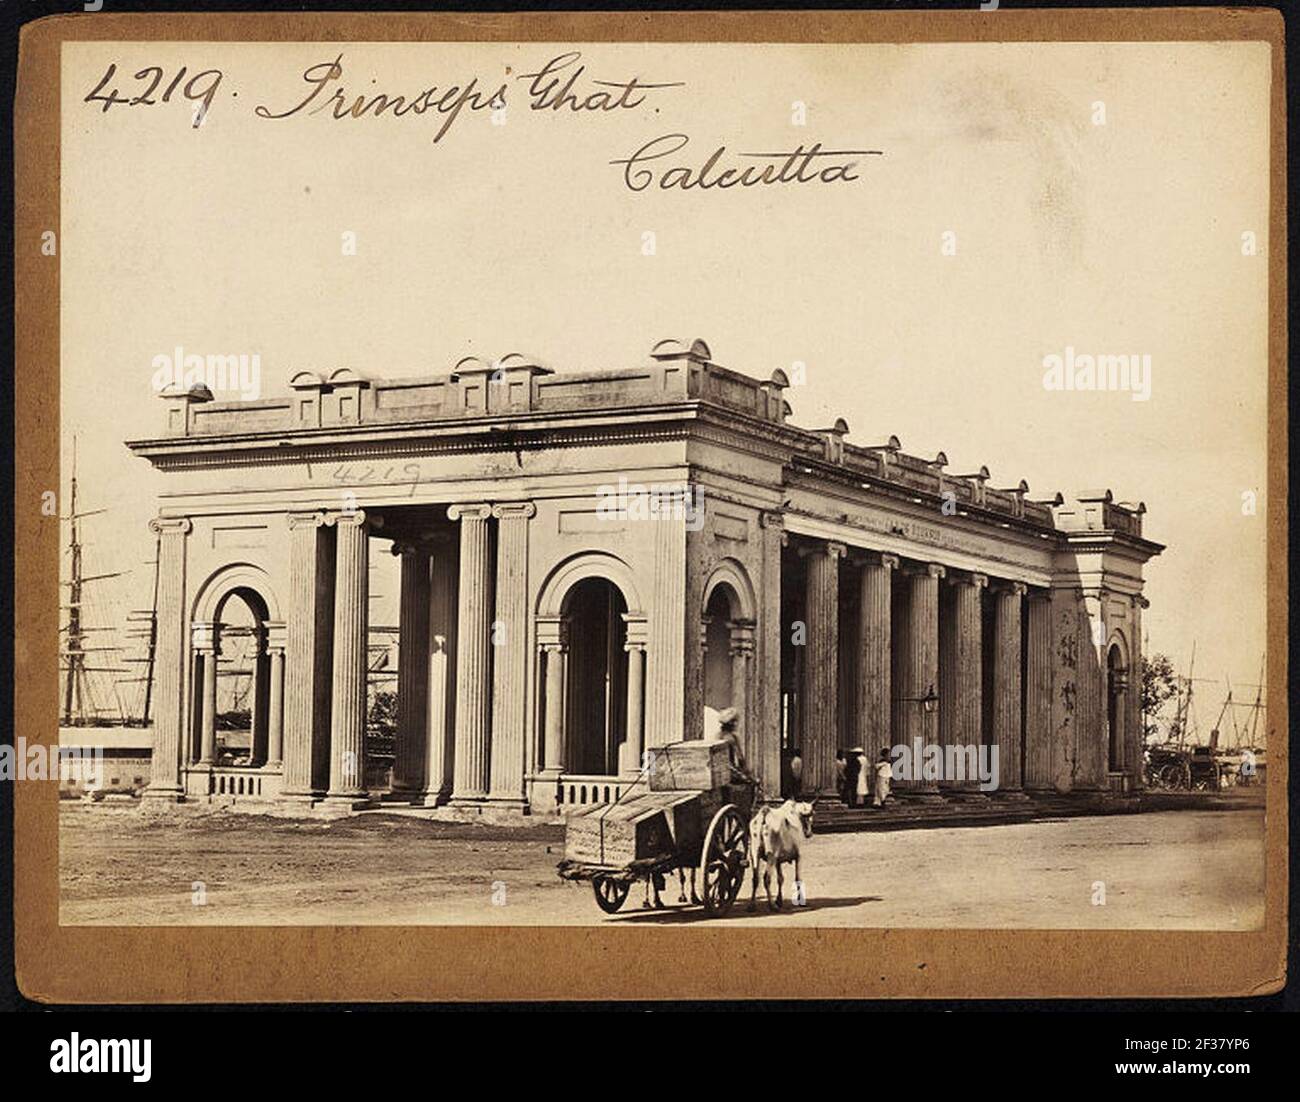 Prinsep's Ghat, Calcutta by Francis Frith. Stock Photo